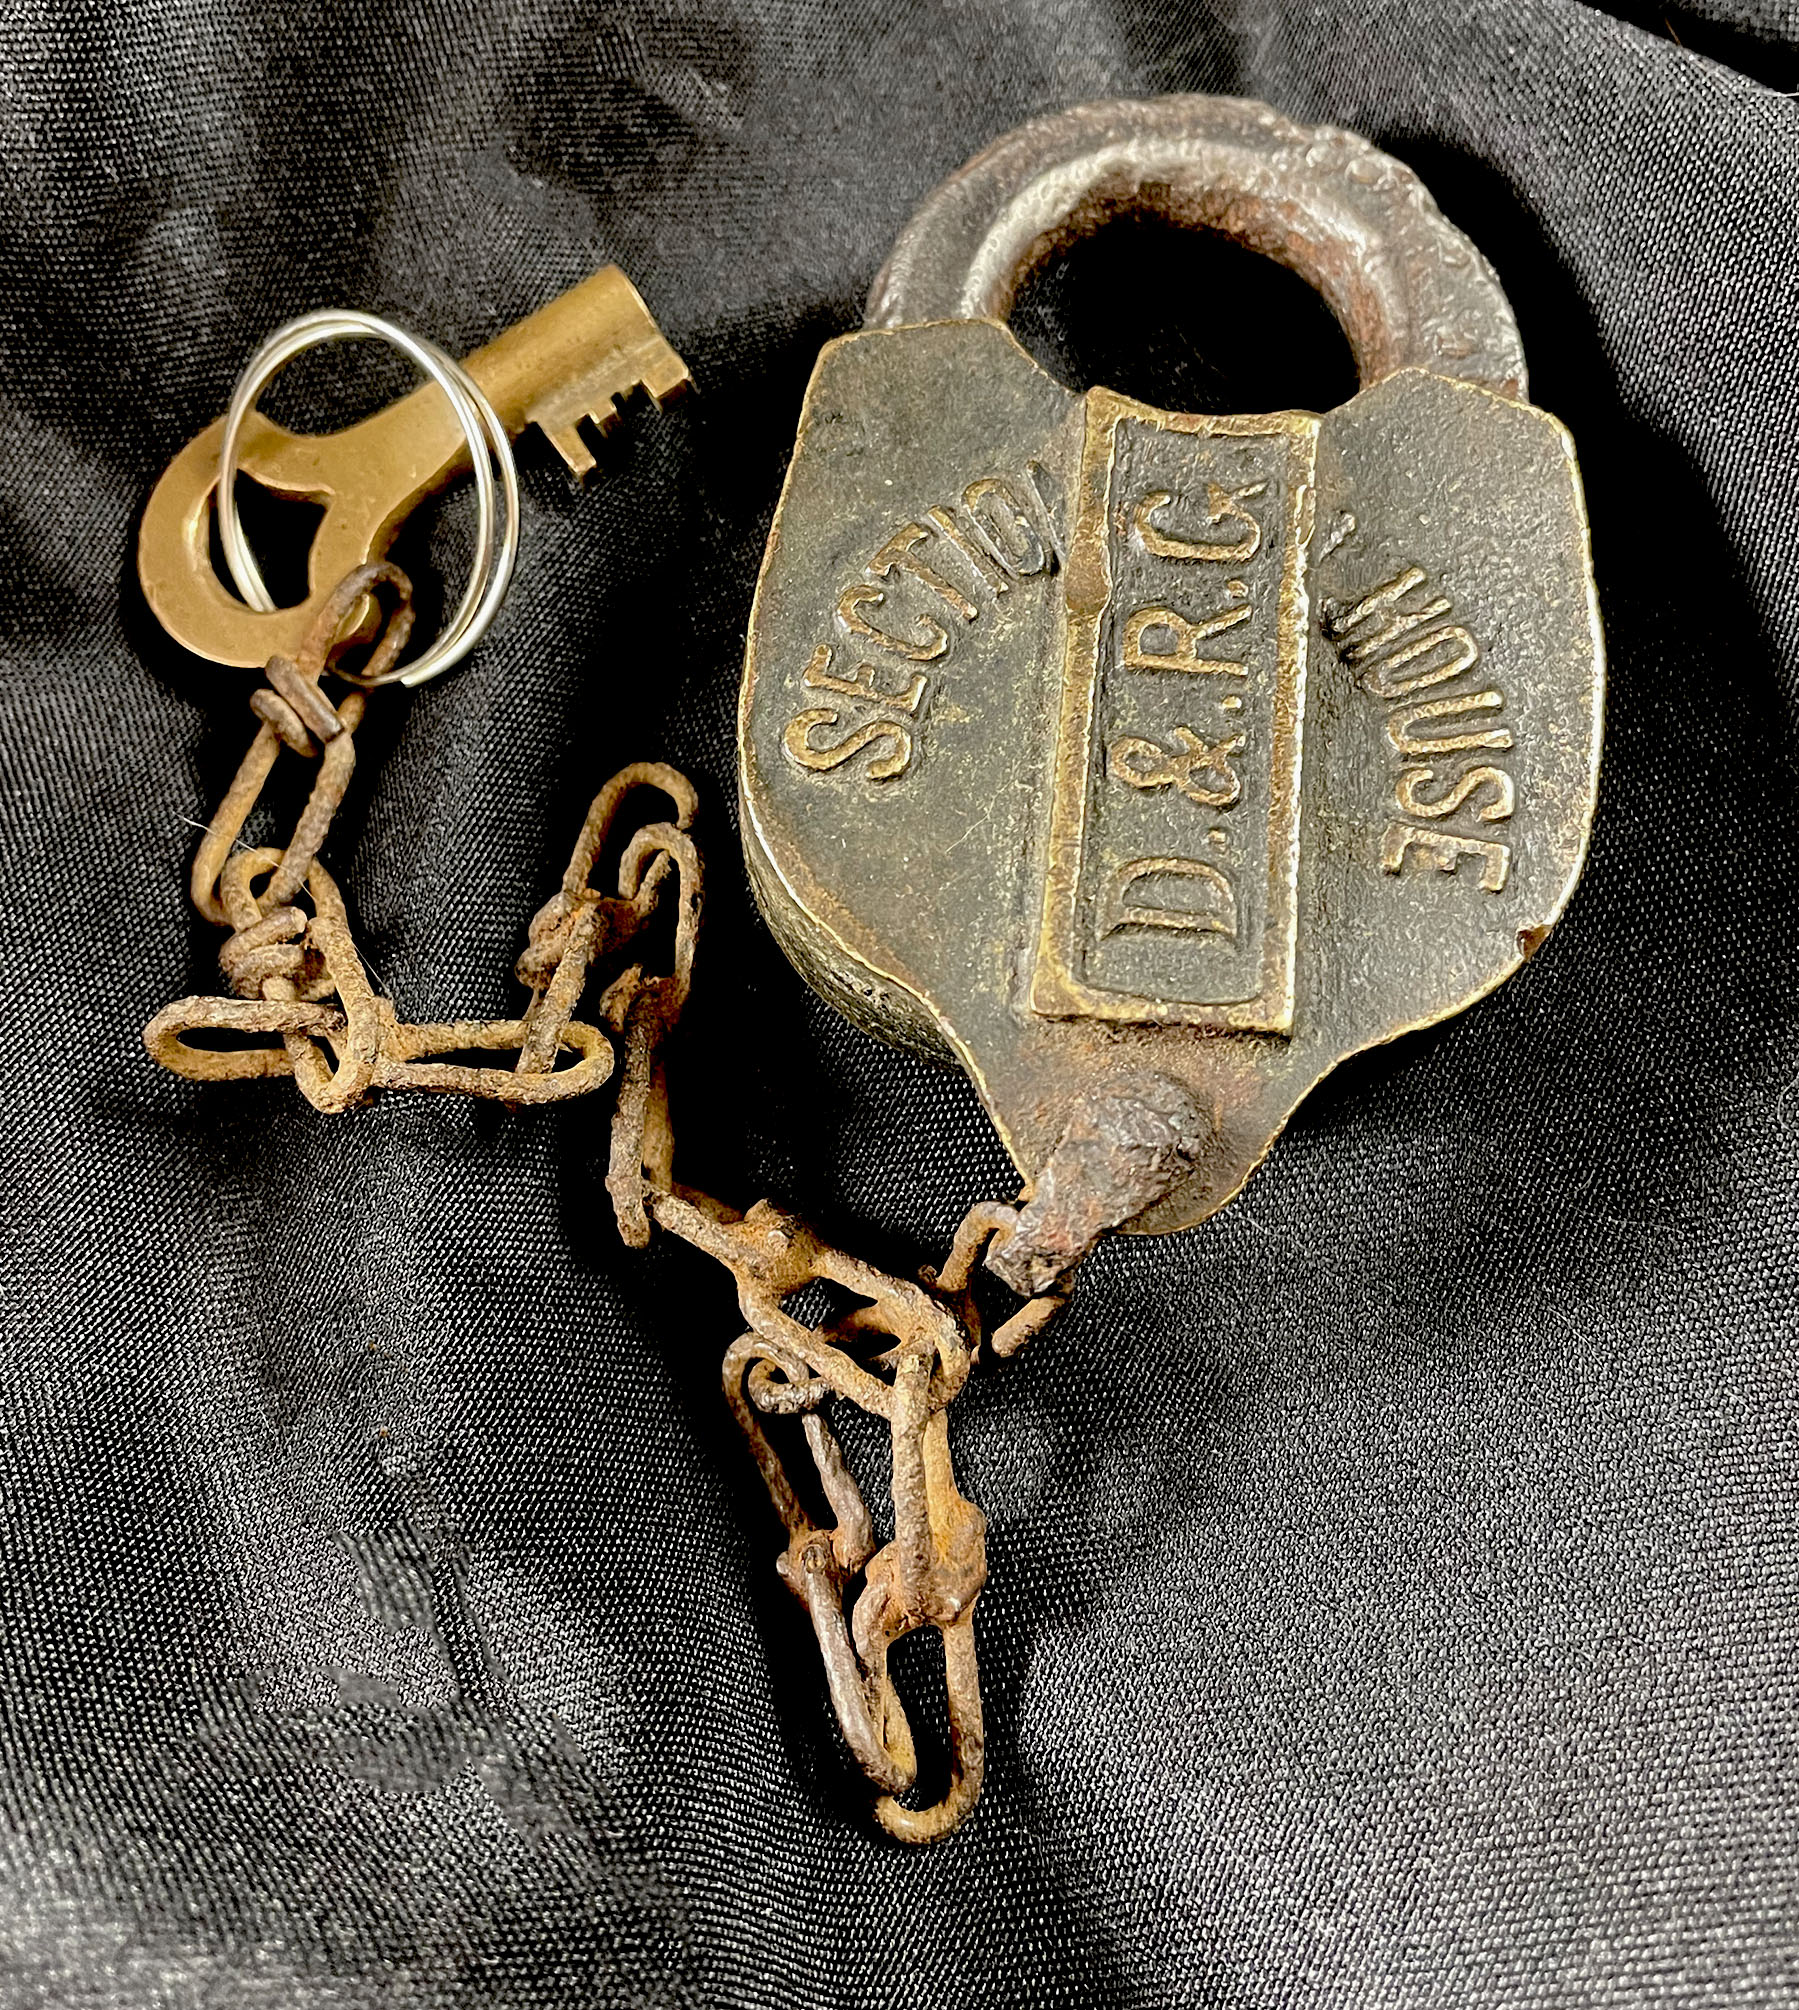 DENVER & RIO GRANDE RAILROAD brass antique Section House lock with key 1910